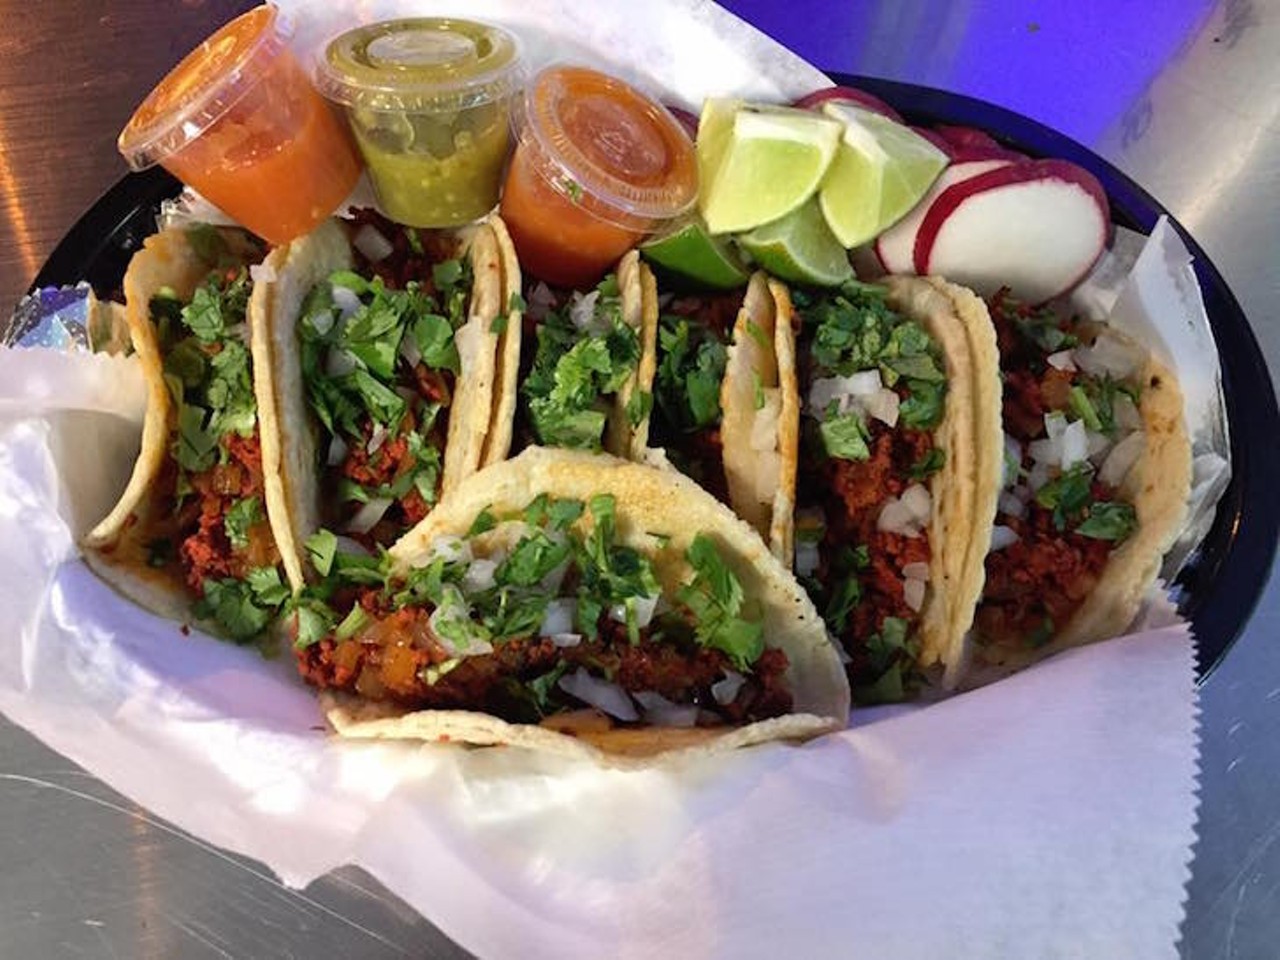 LA Tacos
1404 E. Silver Star Road, Ocoee, 407- 715-9496 
If you&#146;re looking for California-style tacos that lives up to the west coast flavor, LA Tacos might be just what you need. Each taco is served on handmade tortilla with lots of lime wedges for extra flavor. 
Photo via Taqueria La Tacos Estilo Califas/Facebook